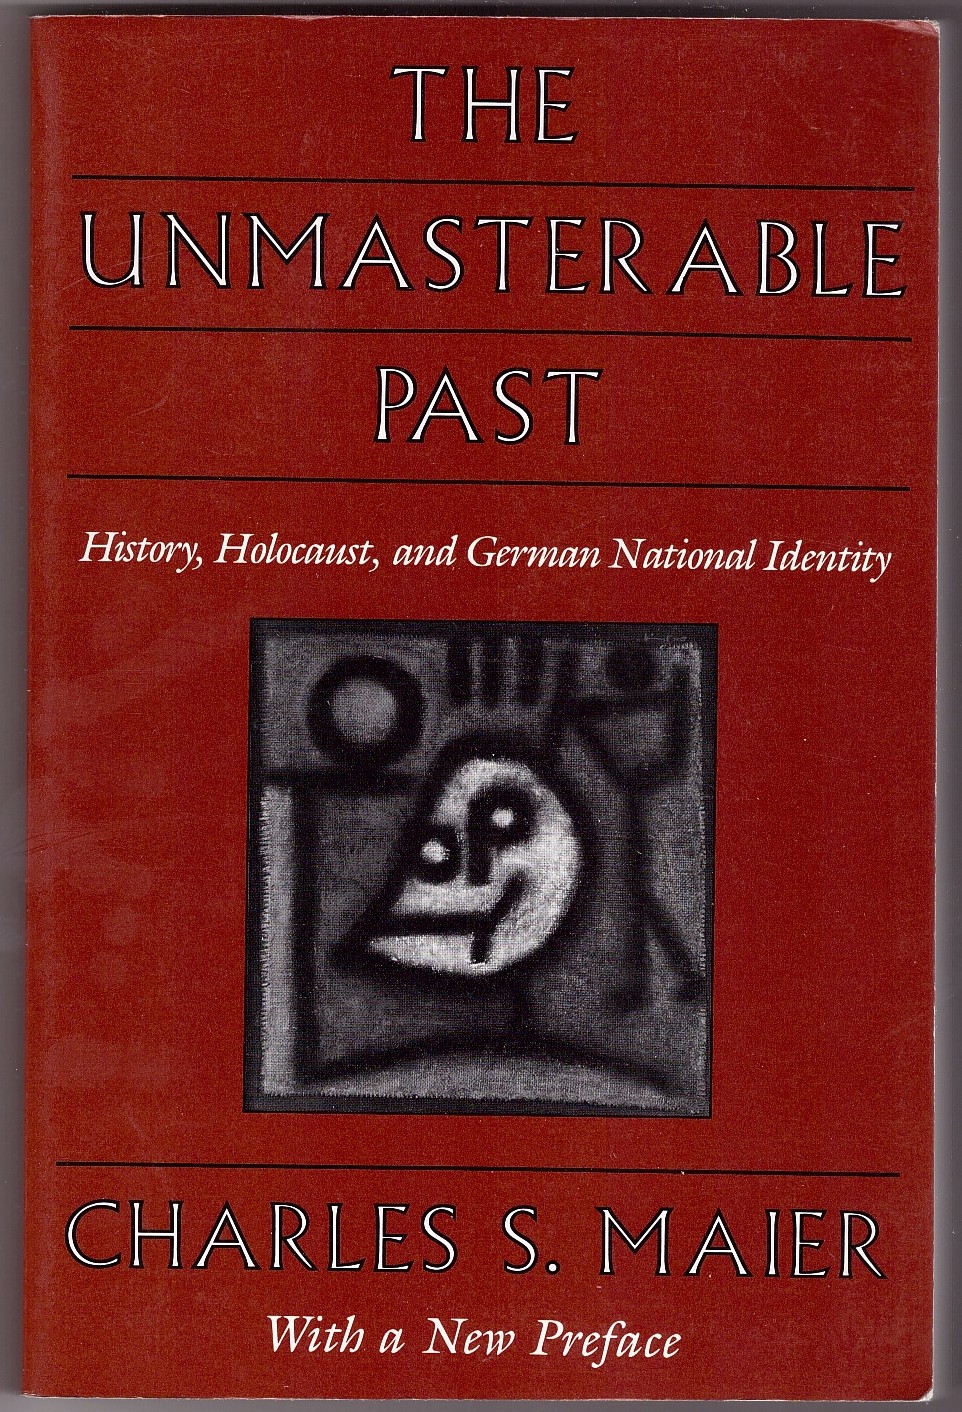 MAIER, CHARLES S. - The Unmasterable Past History, Holocaust, and German National Identity, with a New Preface